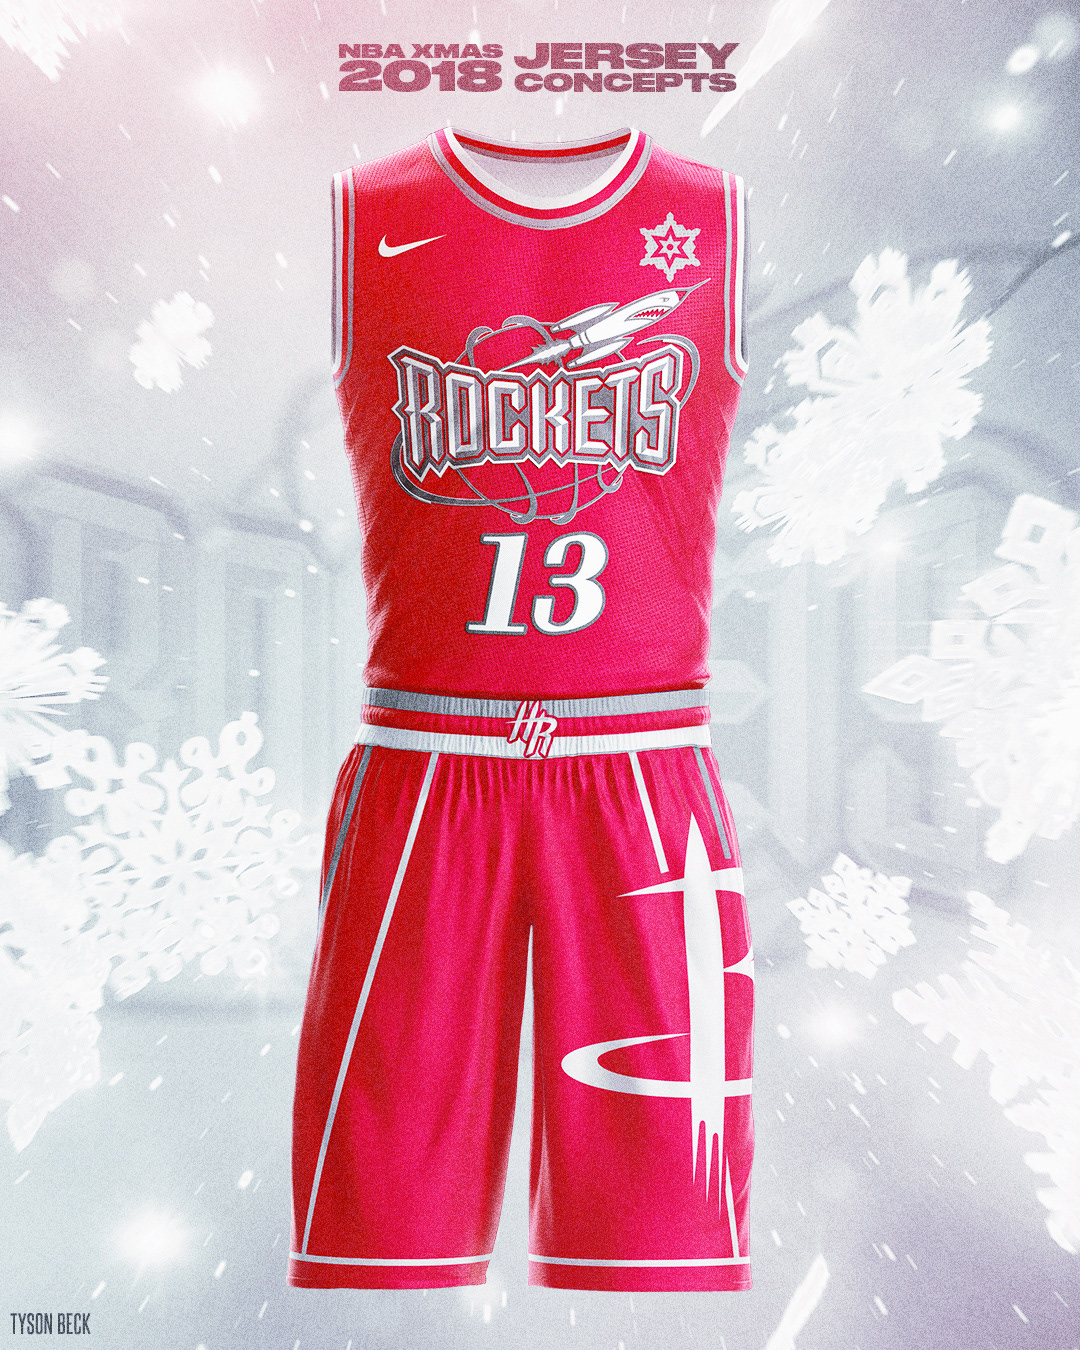 lakers 2018 christmas jersey Off 61% - www.bashhguidelines.org